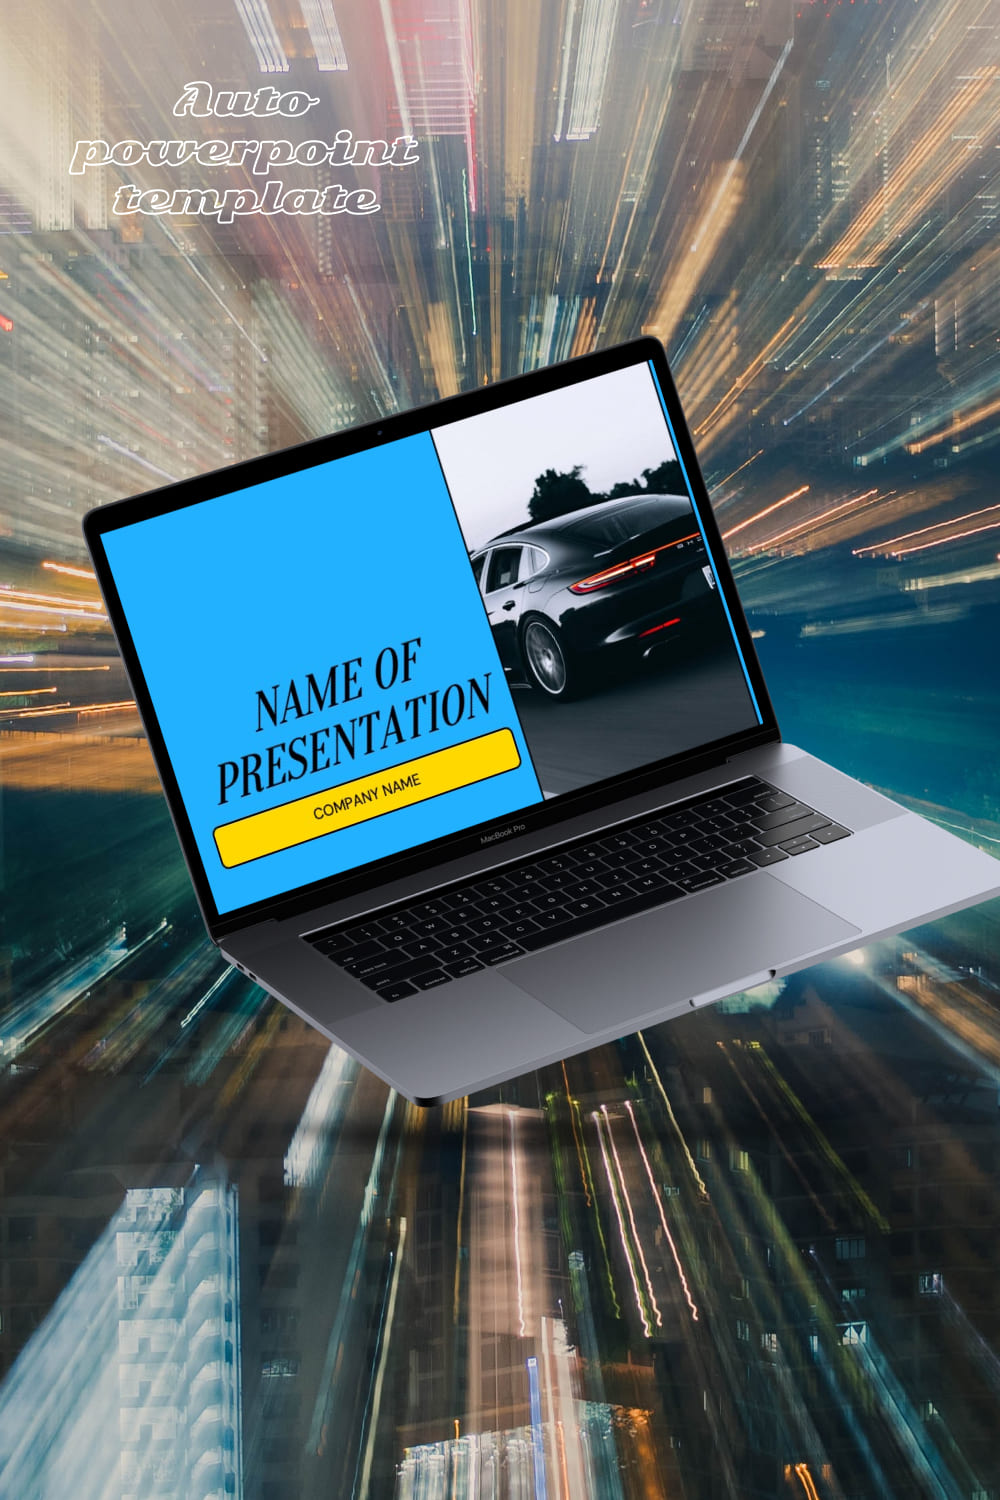 Auto powerpoint template - pinterest image preview.